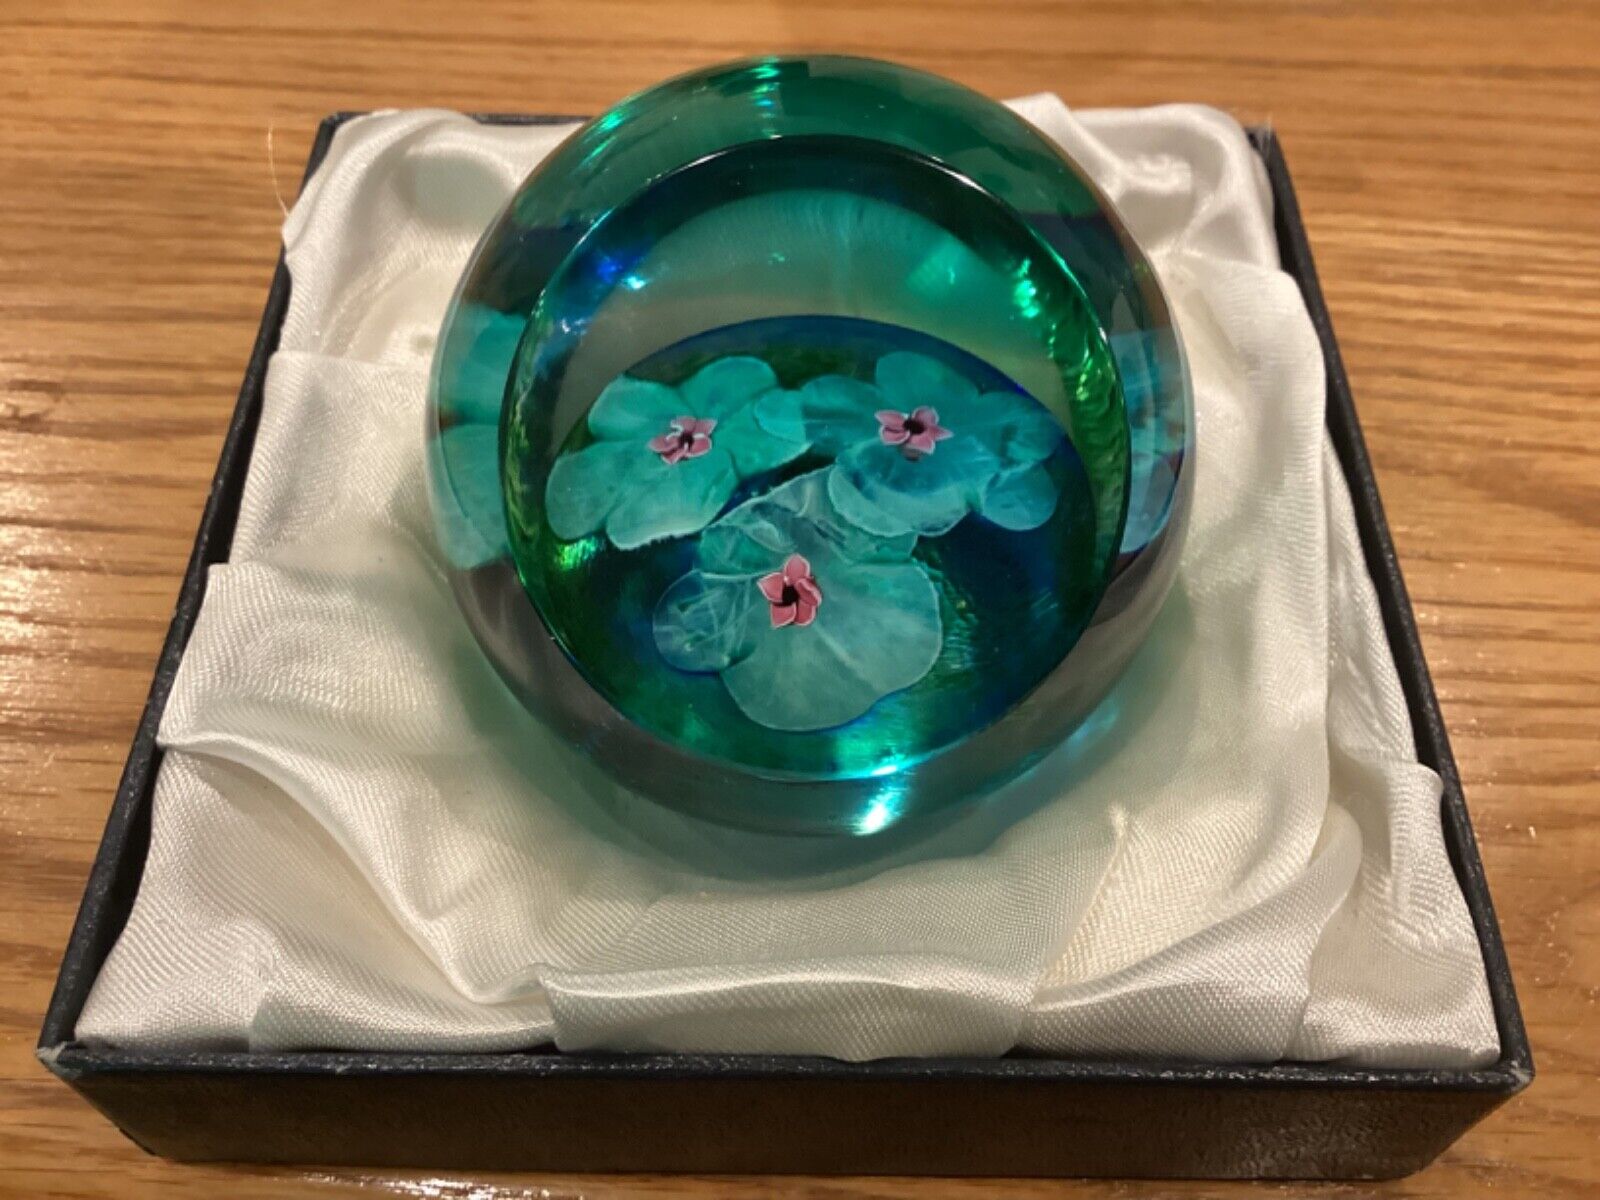 CAITHNESS Scottish Glass Waterlily Impressions Paperweight LE 143/250 Colin